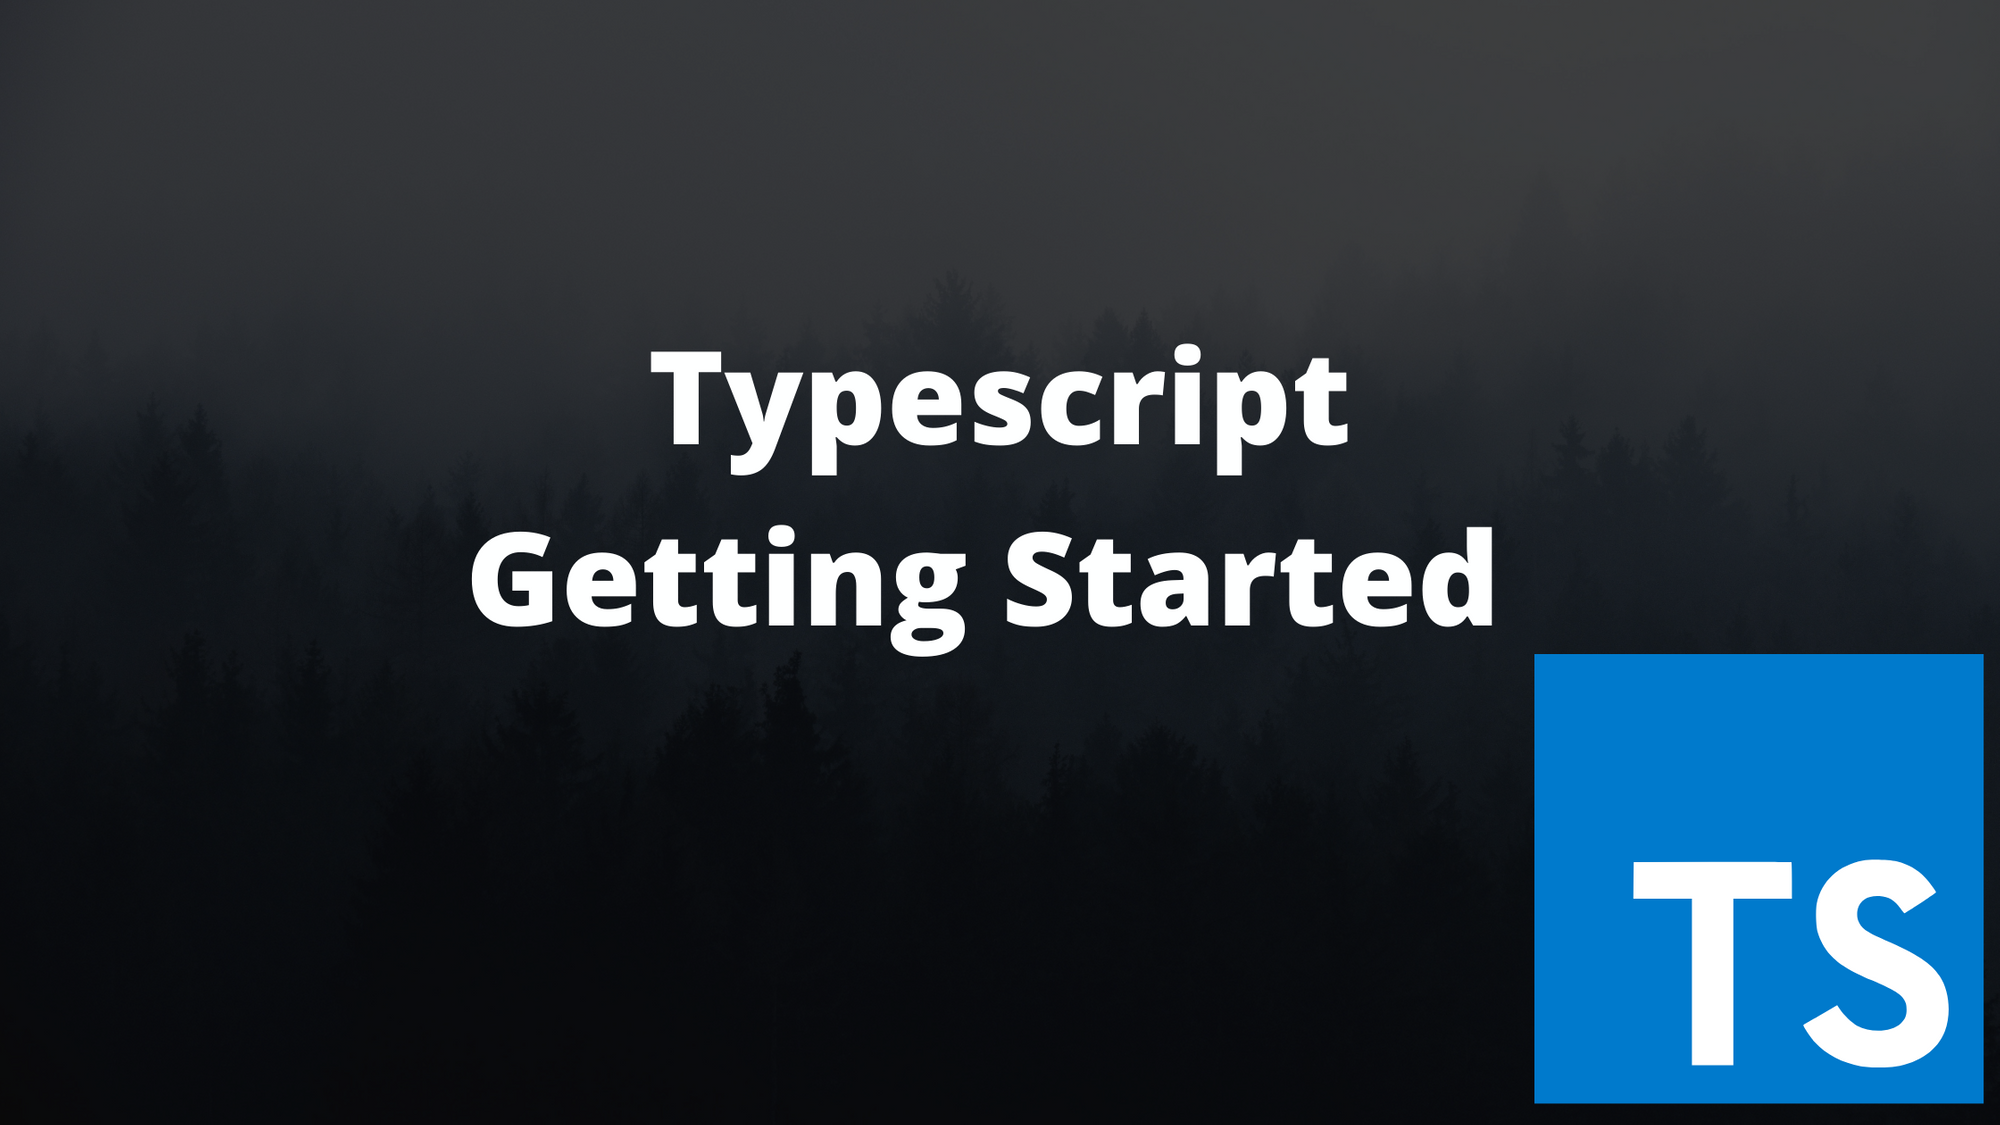 TypeScript has taken the development world by storm. No wonder it has over 15 million weekly downloads on npm. But what is TypeScript, and what do you